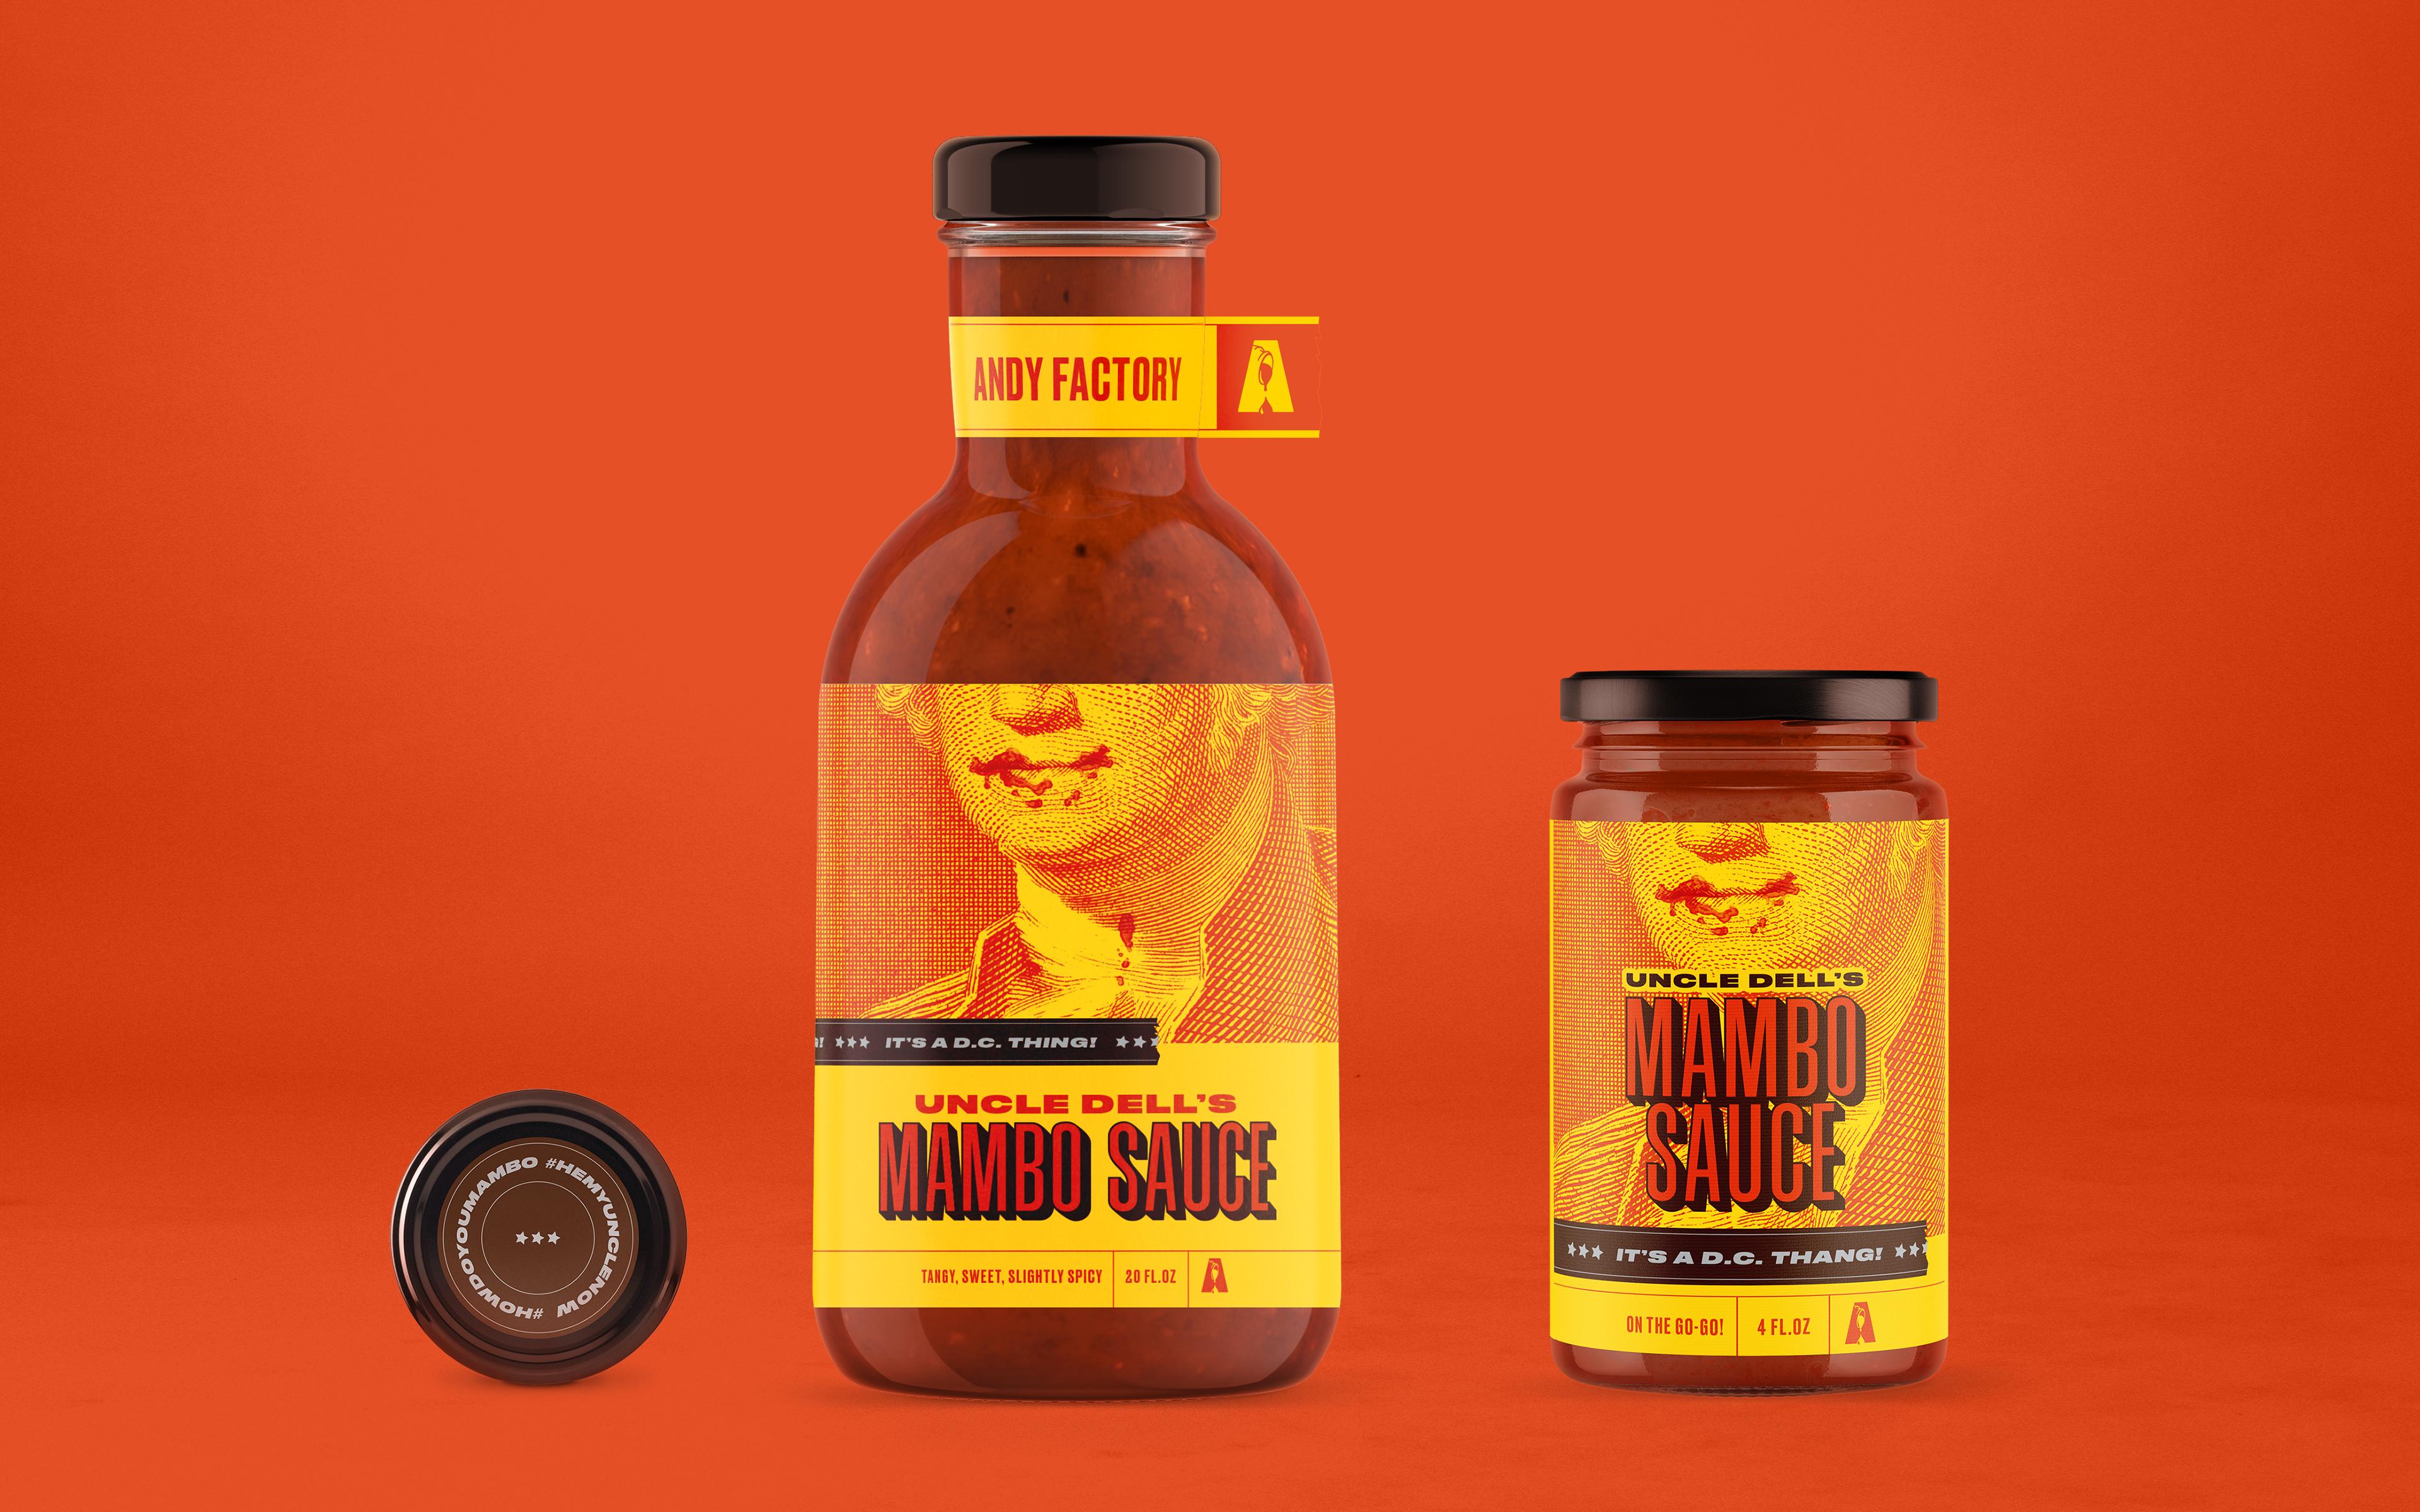 Uncle Dell's Mambo Sauce (Spicy) - Andy Factory